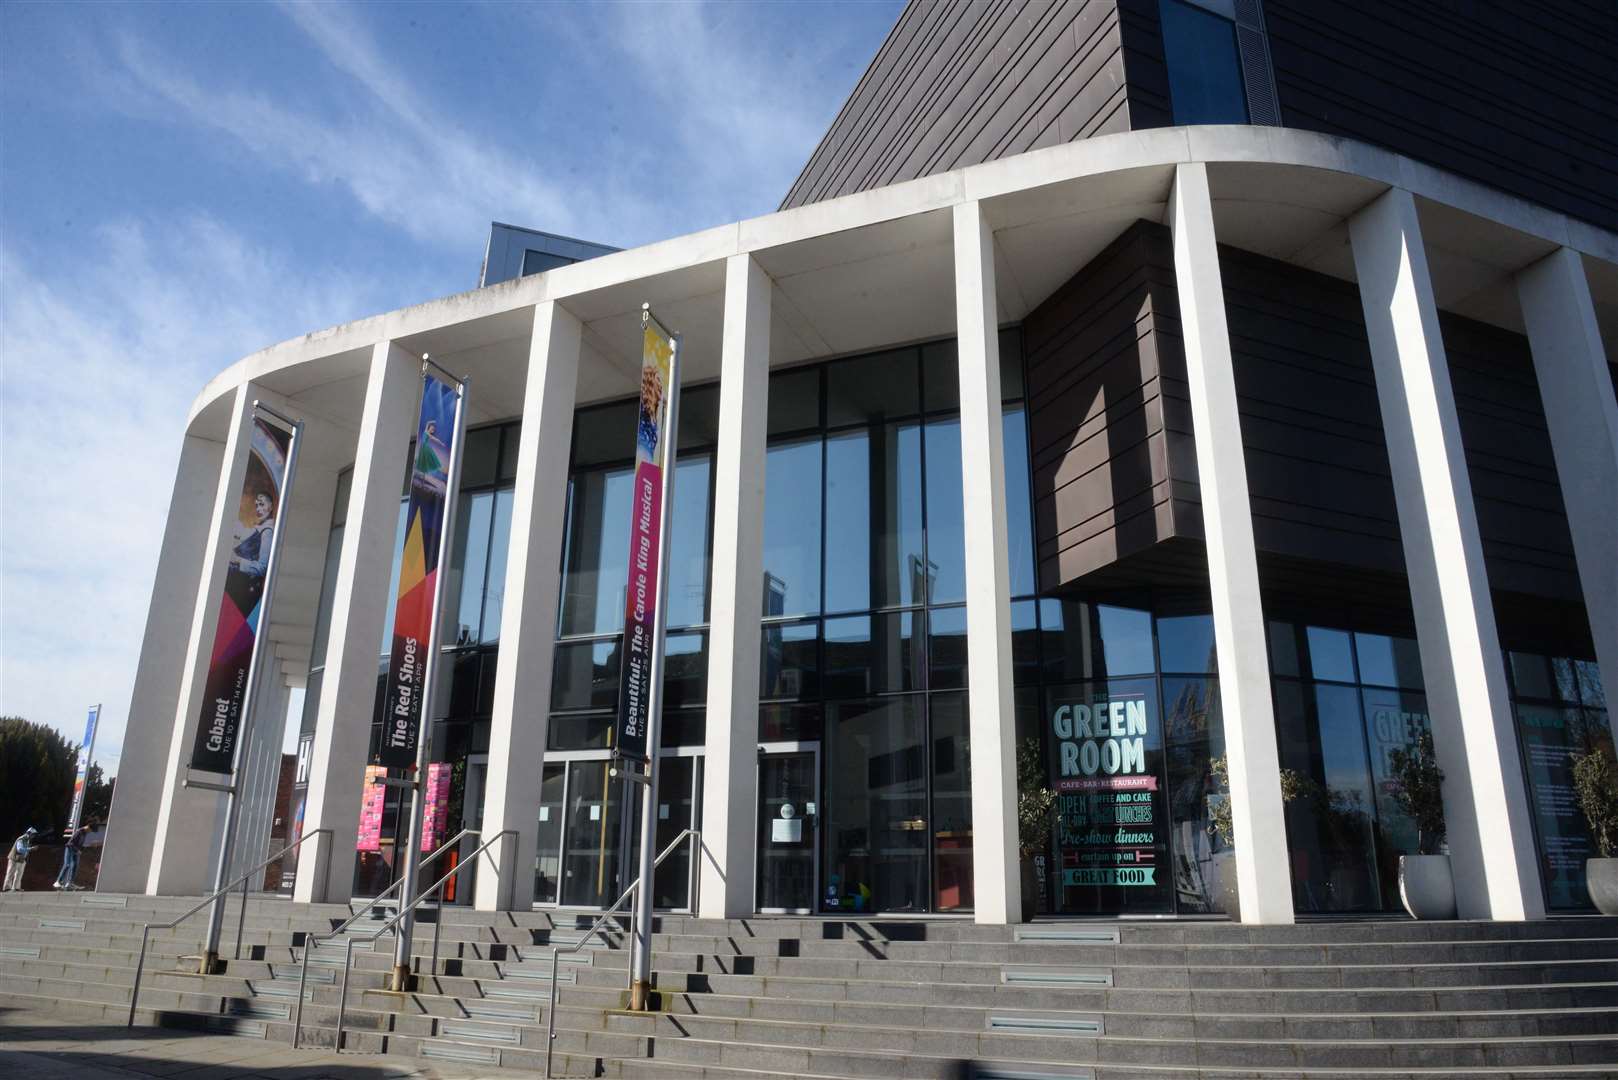 The Marlowe Theatre - best in the country, says The Stage